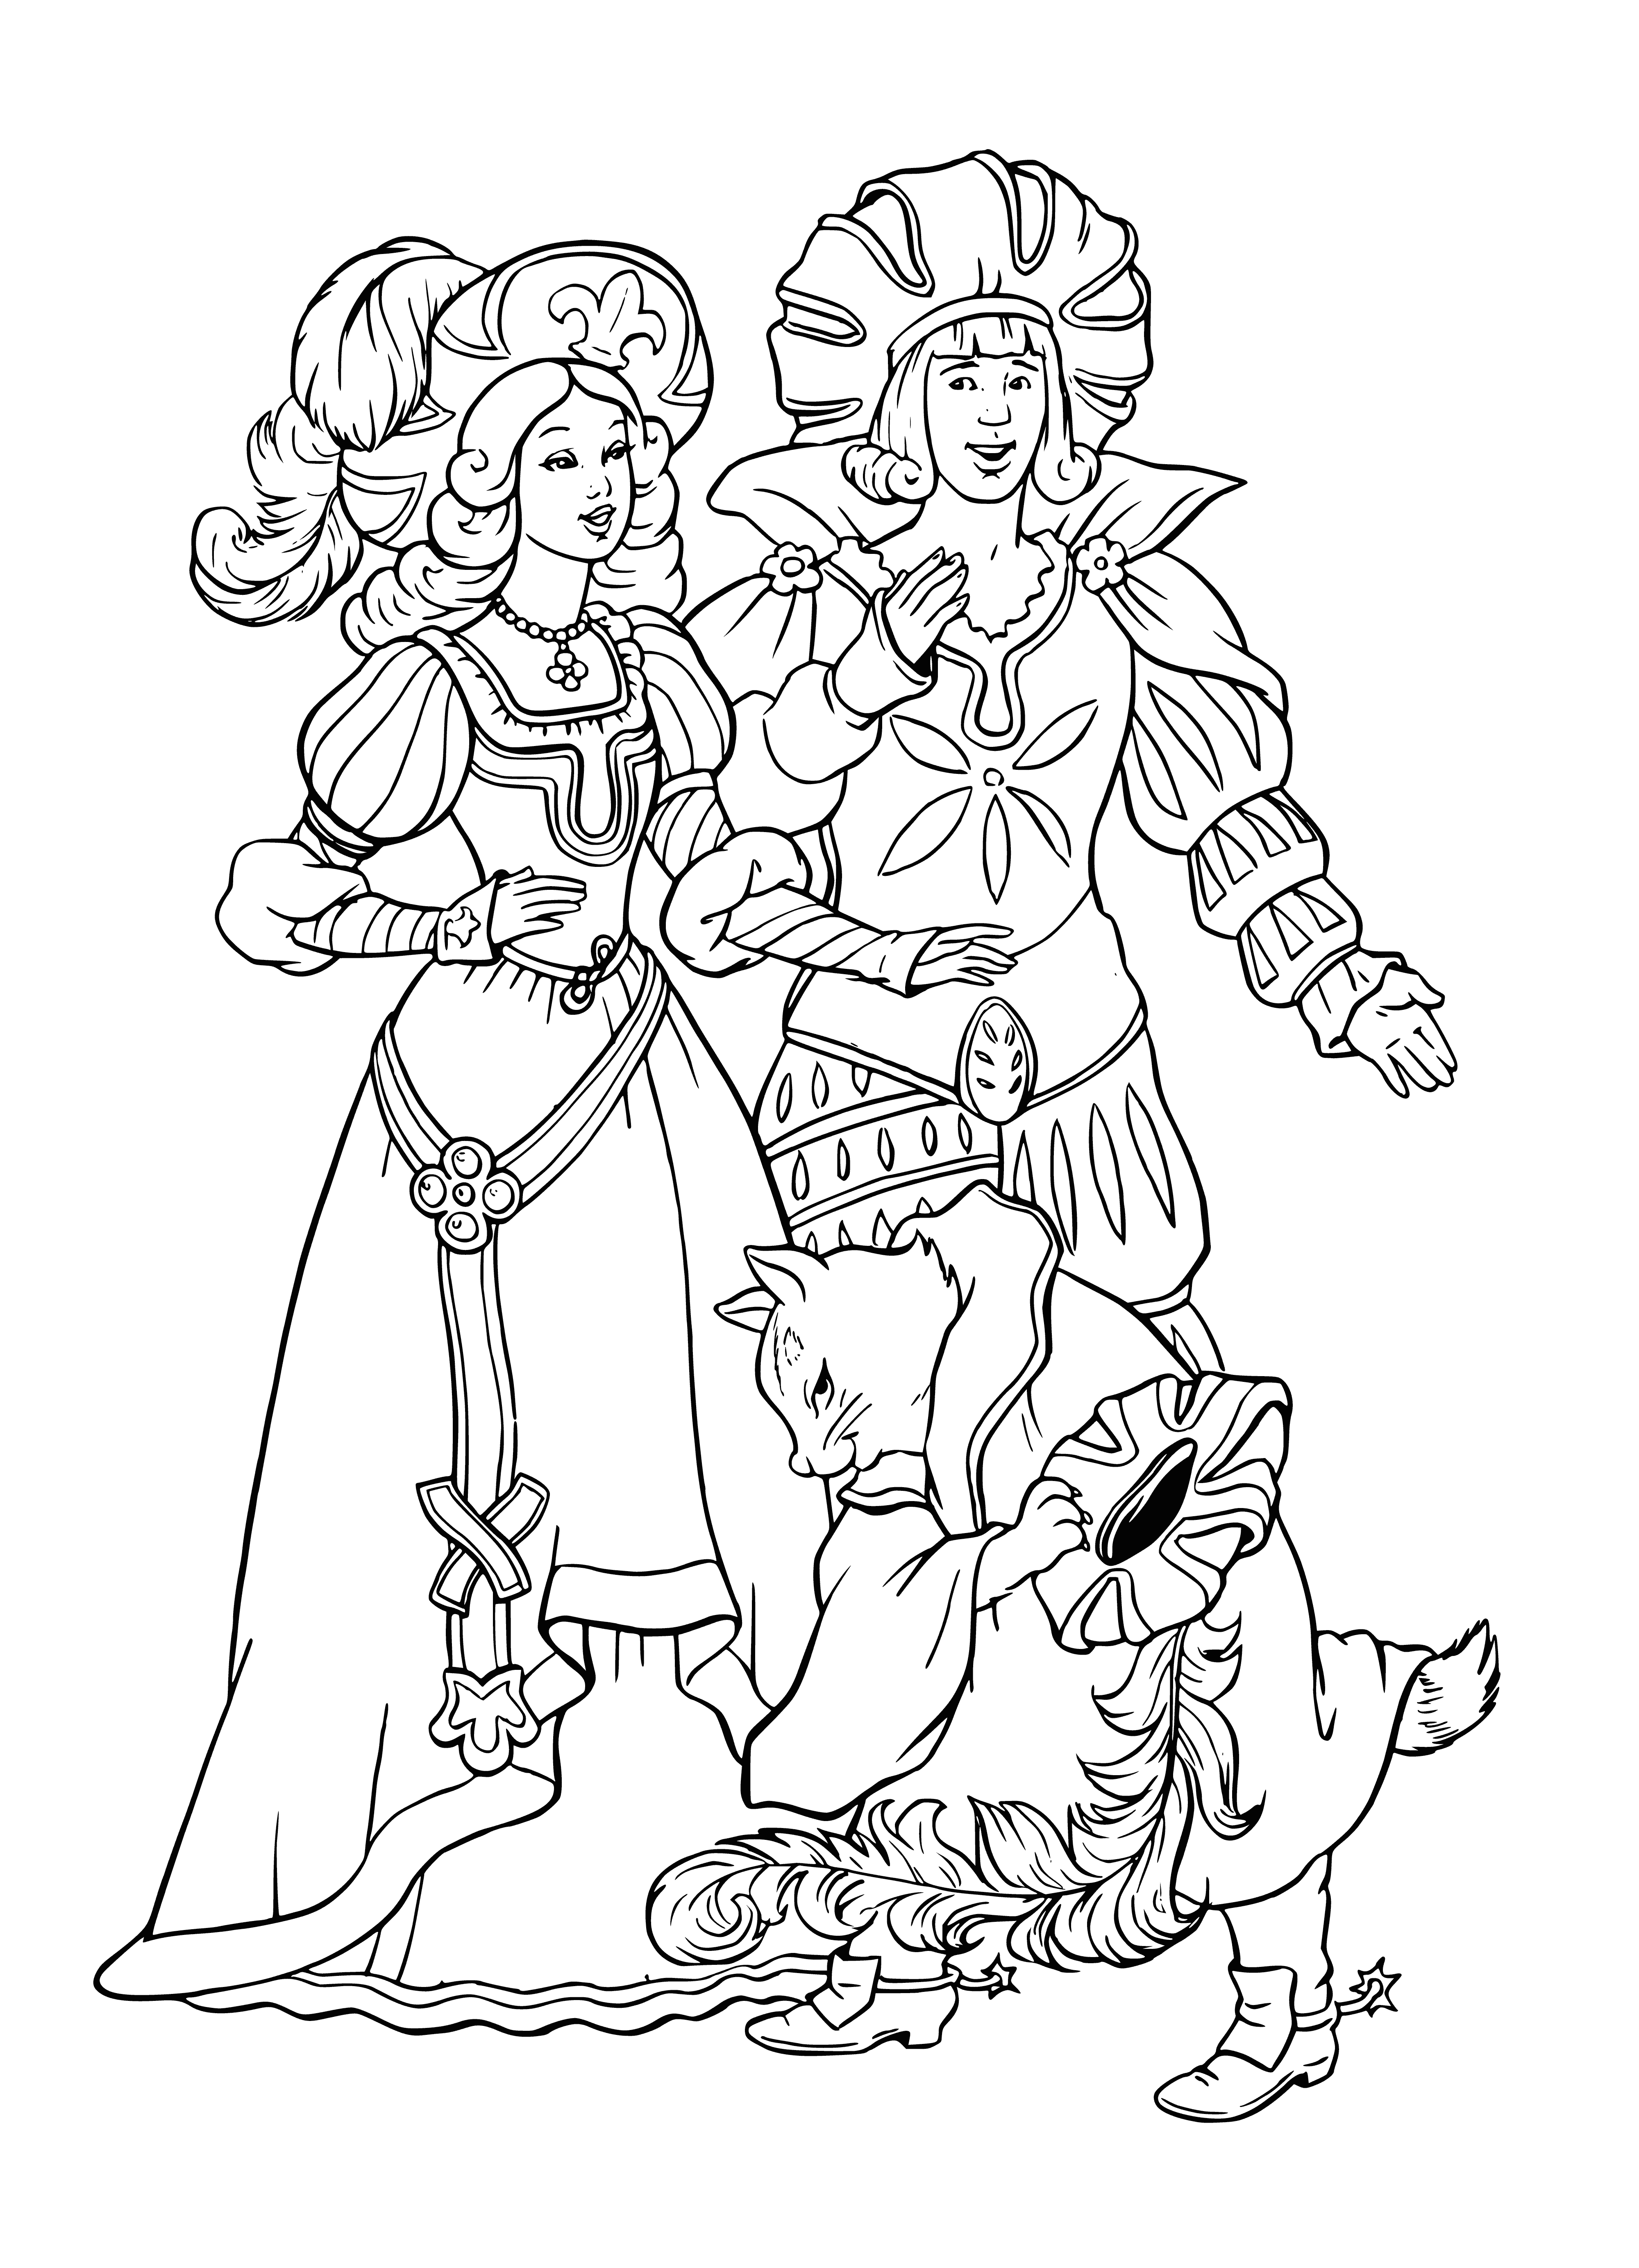 coloring page: Man & woman holding swords stand in front of castle. He's in armor, she's in a long dress.